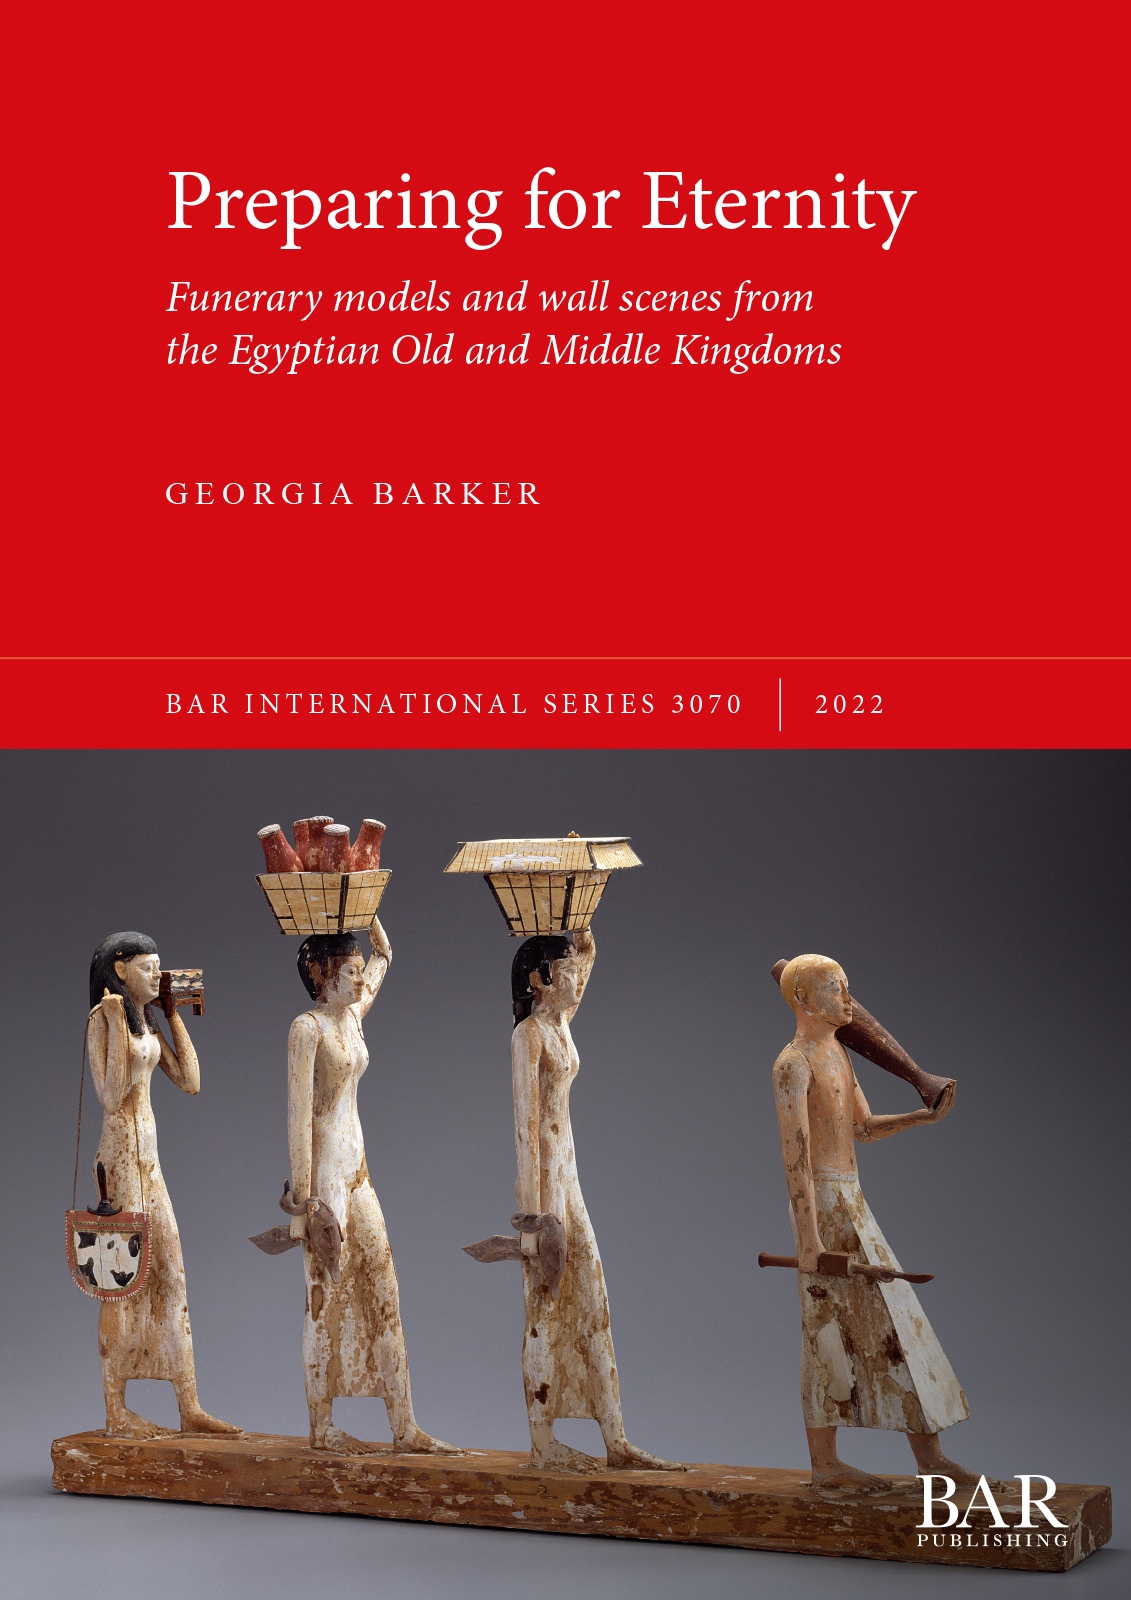 Publication Showcase: Dr Georgia Barker “Preparing for Eternity” in Old and Middle Kingdom Egypt